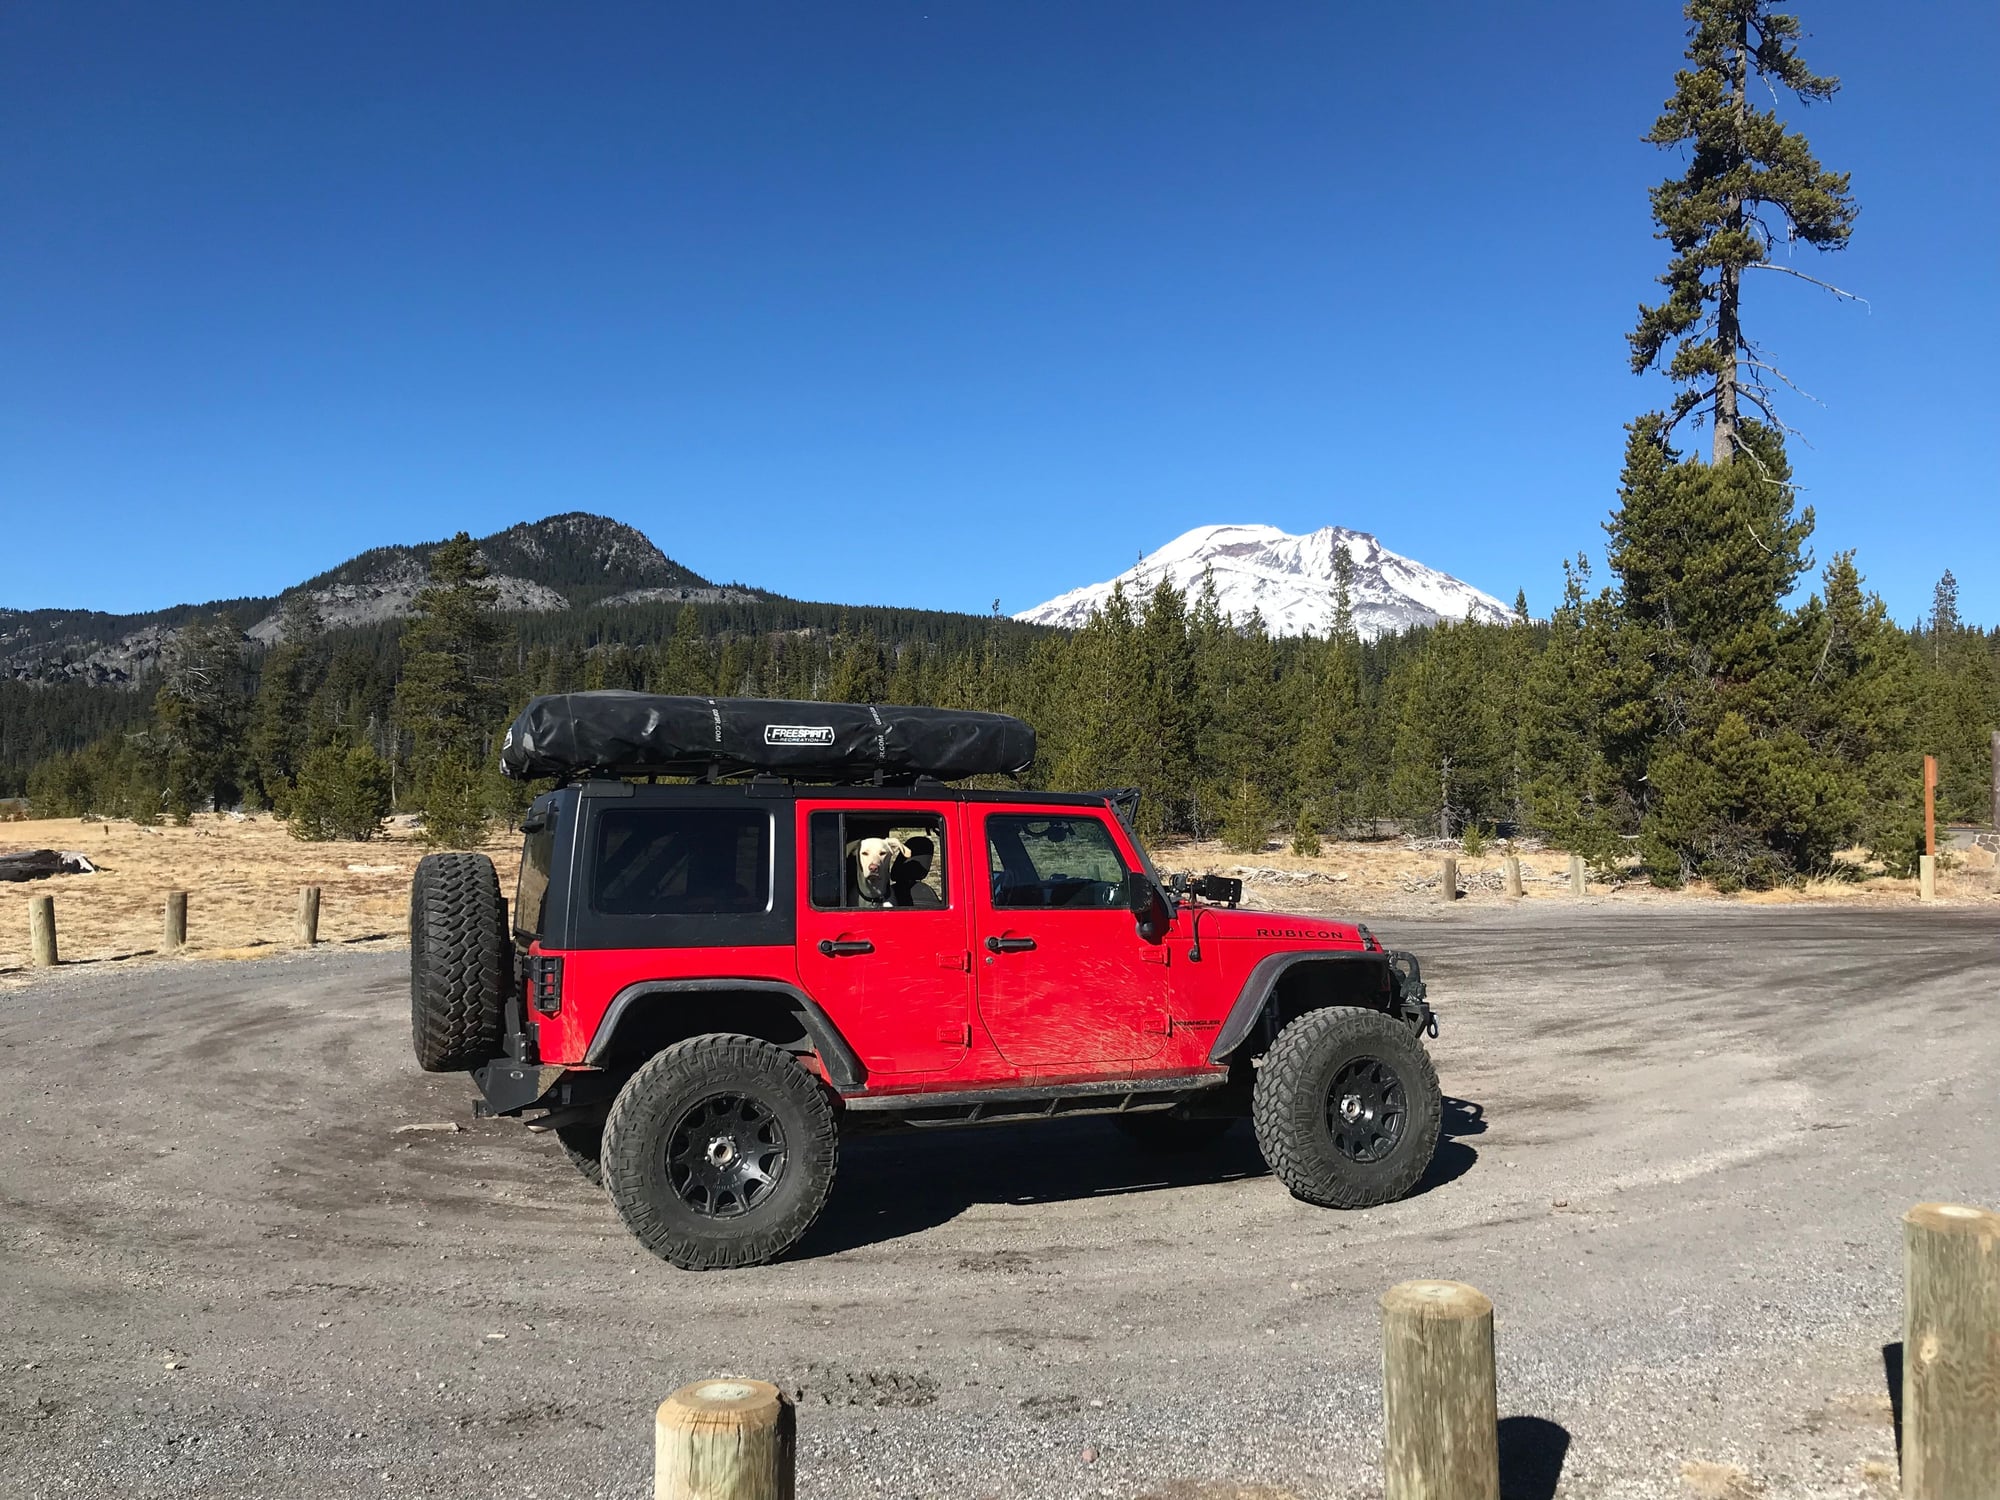 2015 Jeep Wrangler - 2015 Wrangler Unlimited Rubicon - Used - VIN 1c4bjwfg6fl757442 - 31,000 Miles - 6 cyl - Automatic - Red - Bend, OR 97702, United States